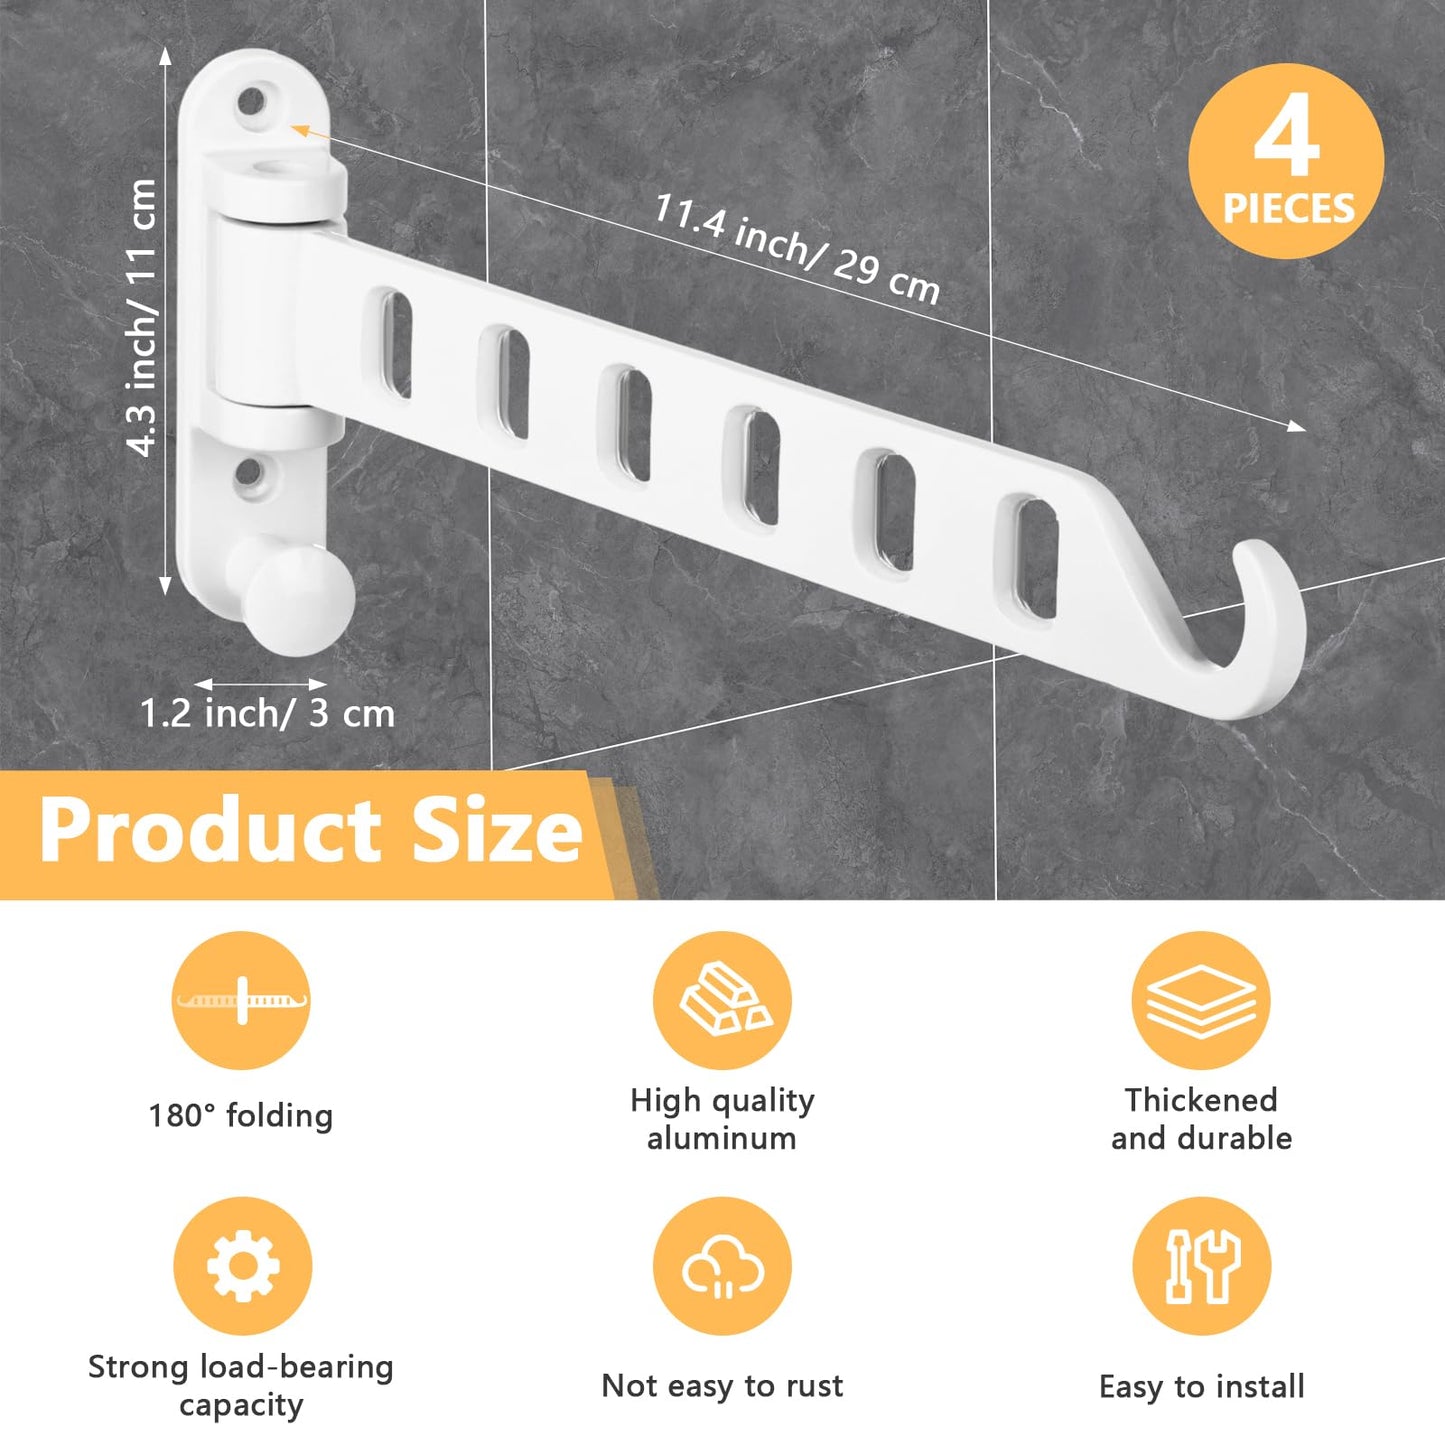 4 Pieces Wall Mounted Drying Rack Small Laundry Hanger Dryer Rack with Swing Arm Wall White Clothes Hanging Rack Folding Clothes Rack Wall Hangers for Laundry Room Bedroom